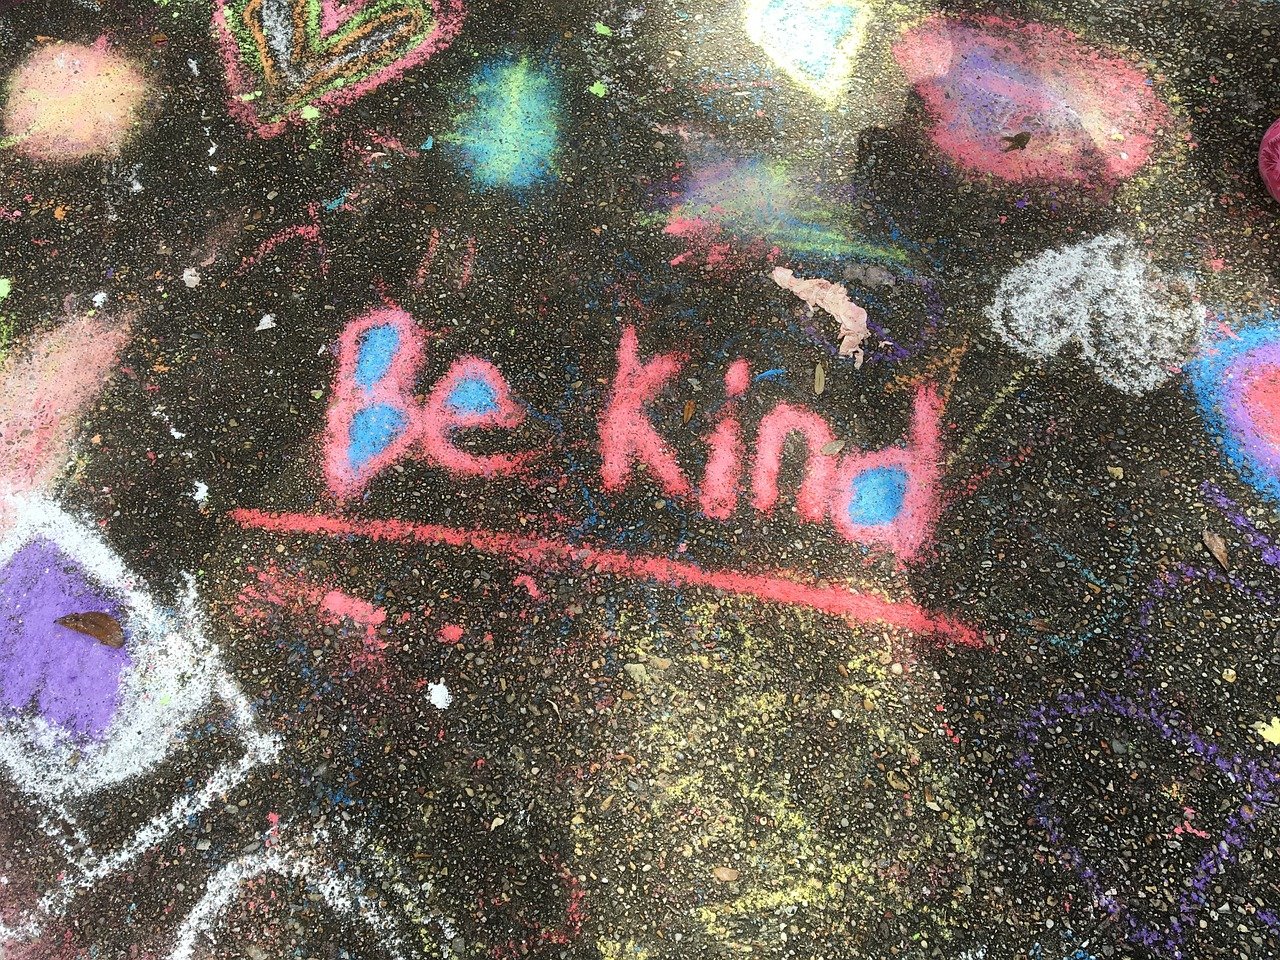 An image of a sidewalk chalk drawing with the phrase "Be Kind" in the center